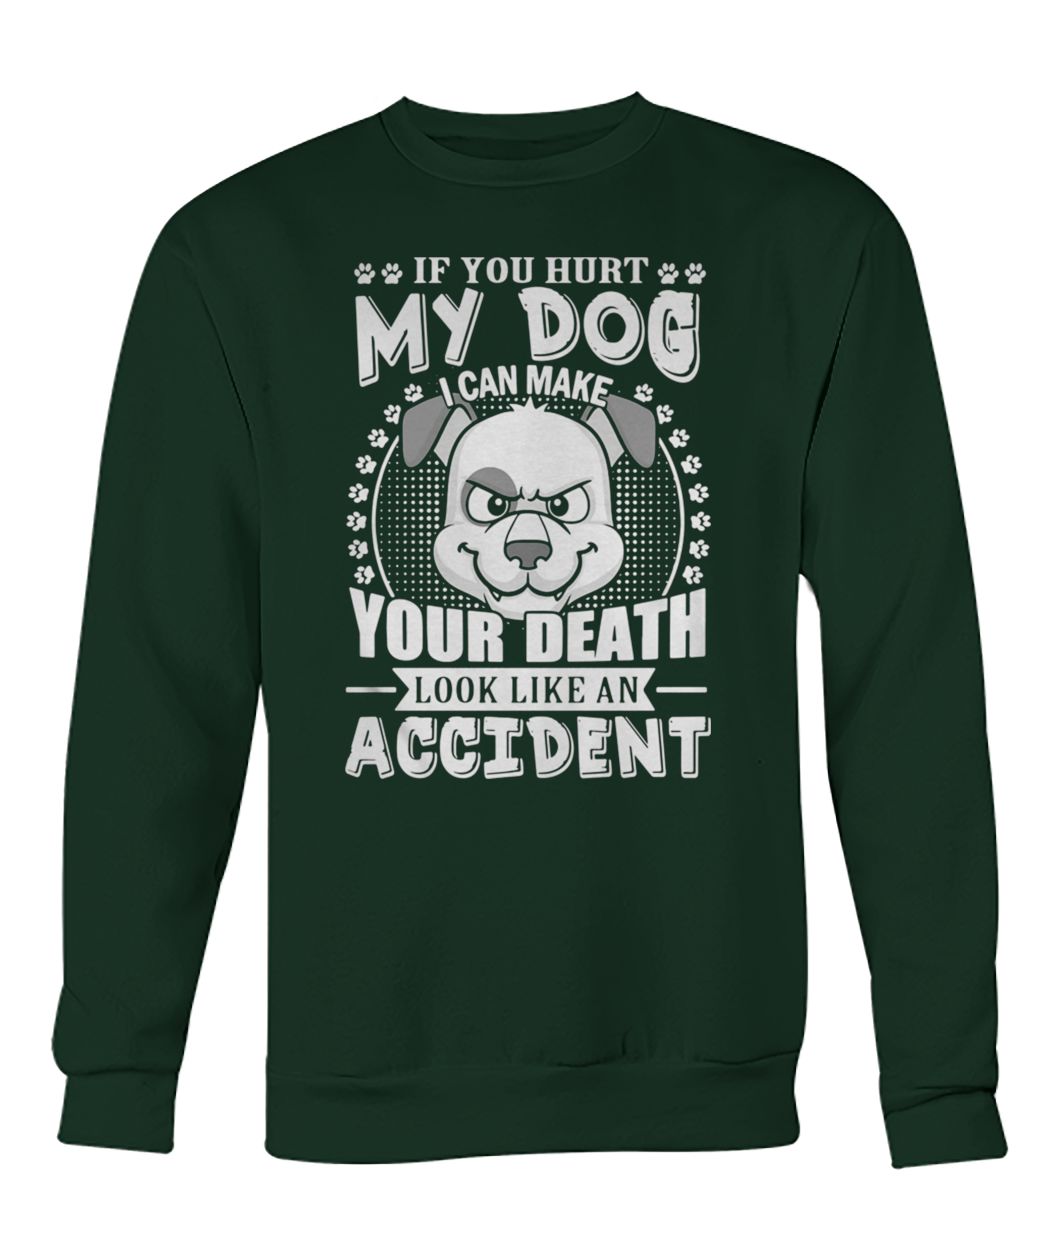 If you hurt my dog I can make your death look like an accident crew neck sweatshirt